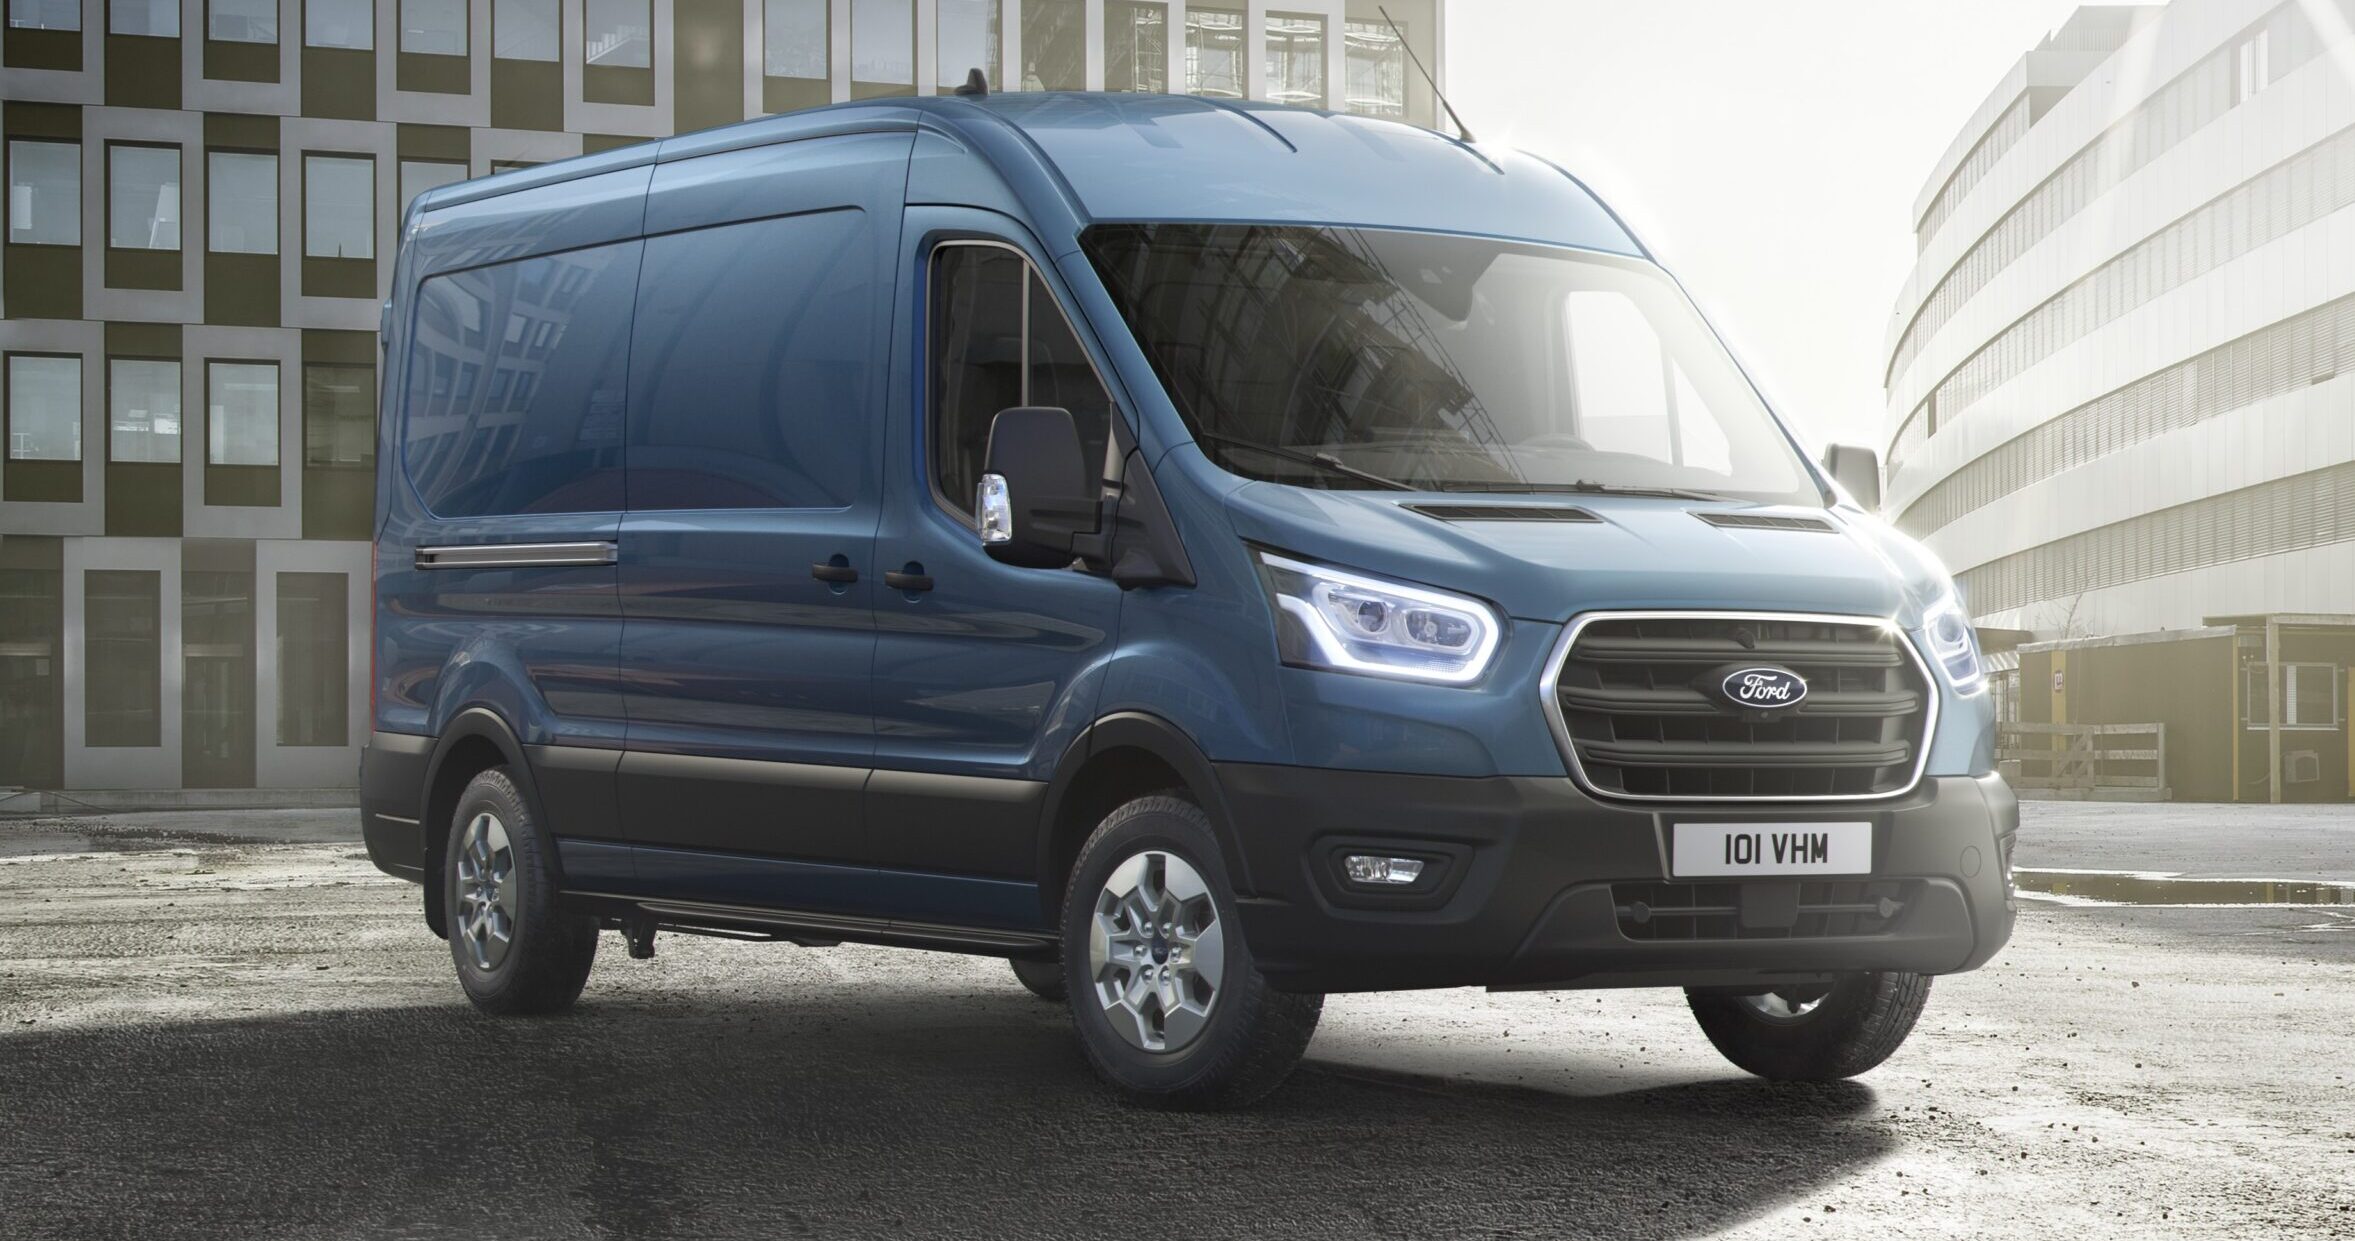 New digital features and enhanced technology coming to Ford Transit in 2024